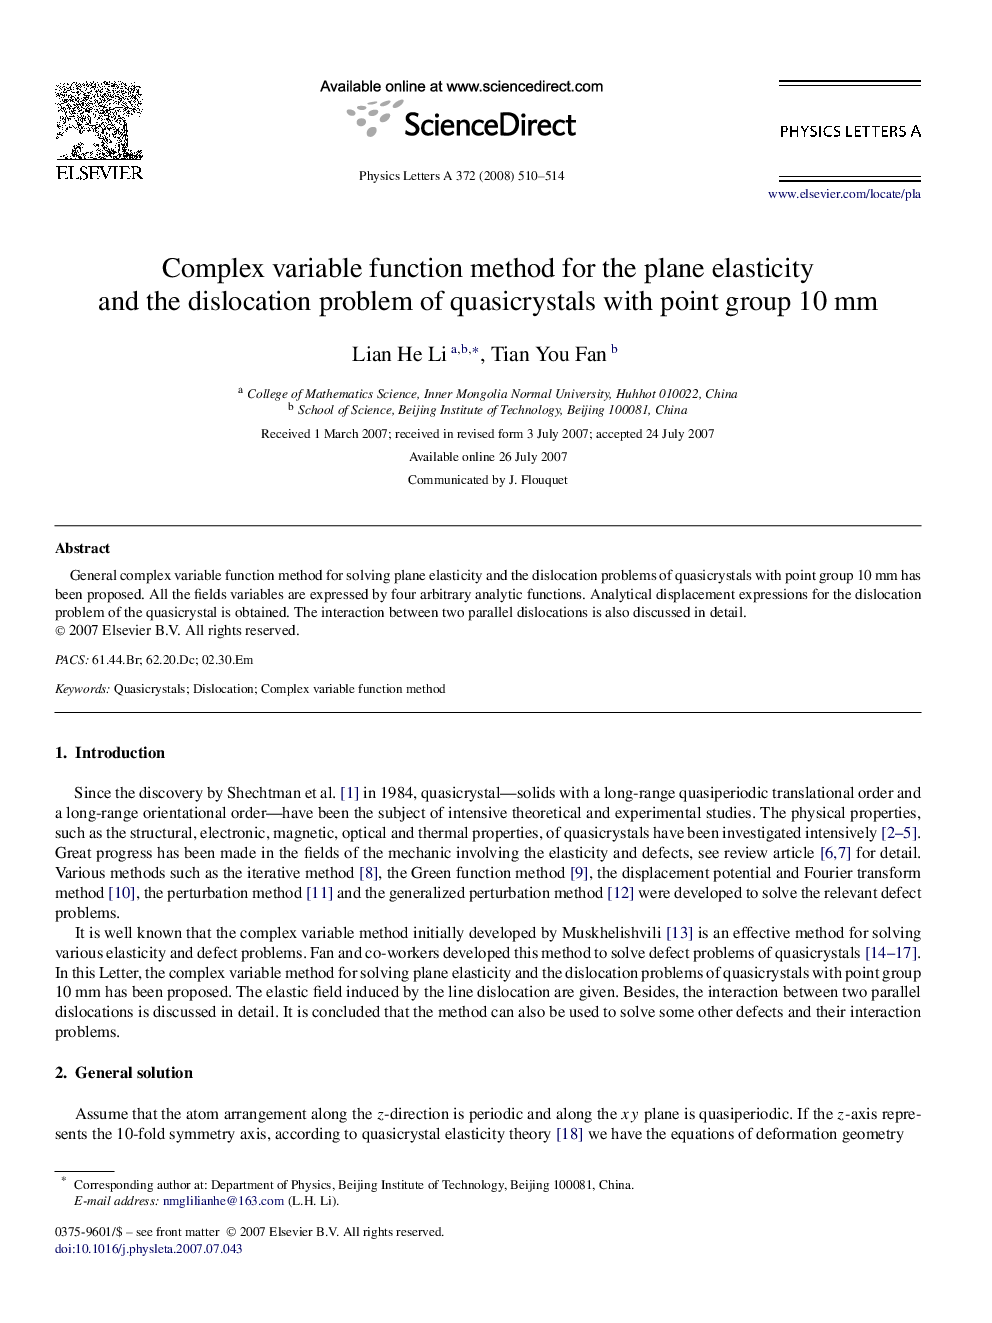 Complex variable function method for the plane elasticity and the dislocation problem of quasicrystals with point group 10 mm